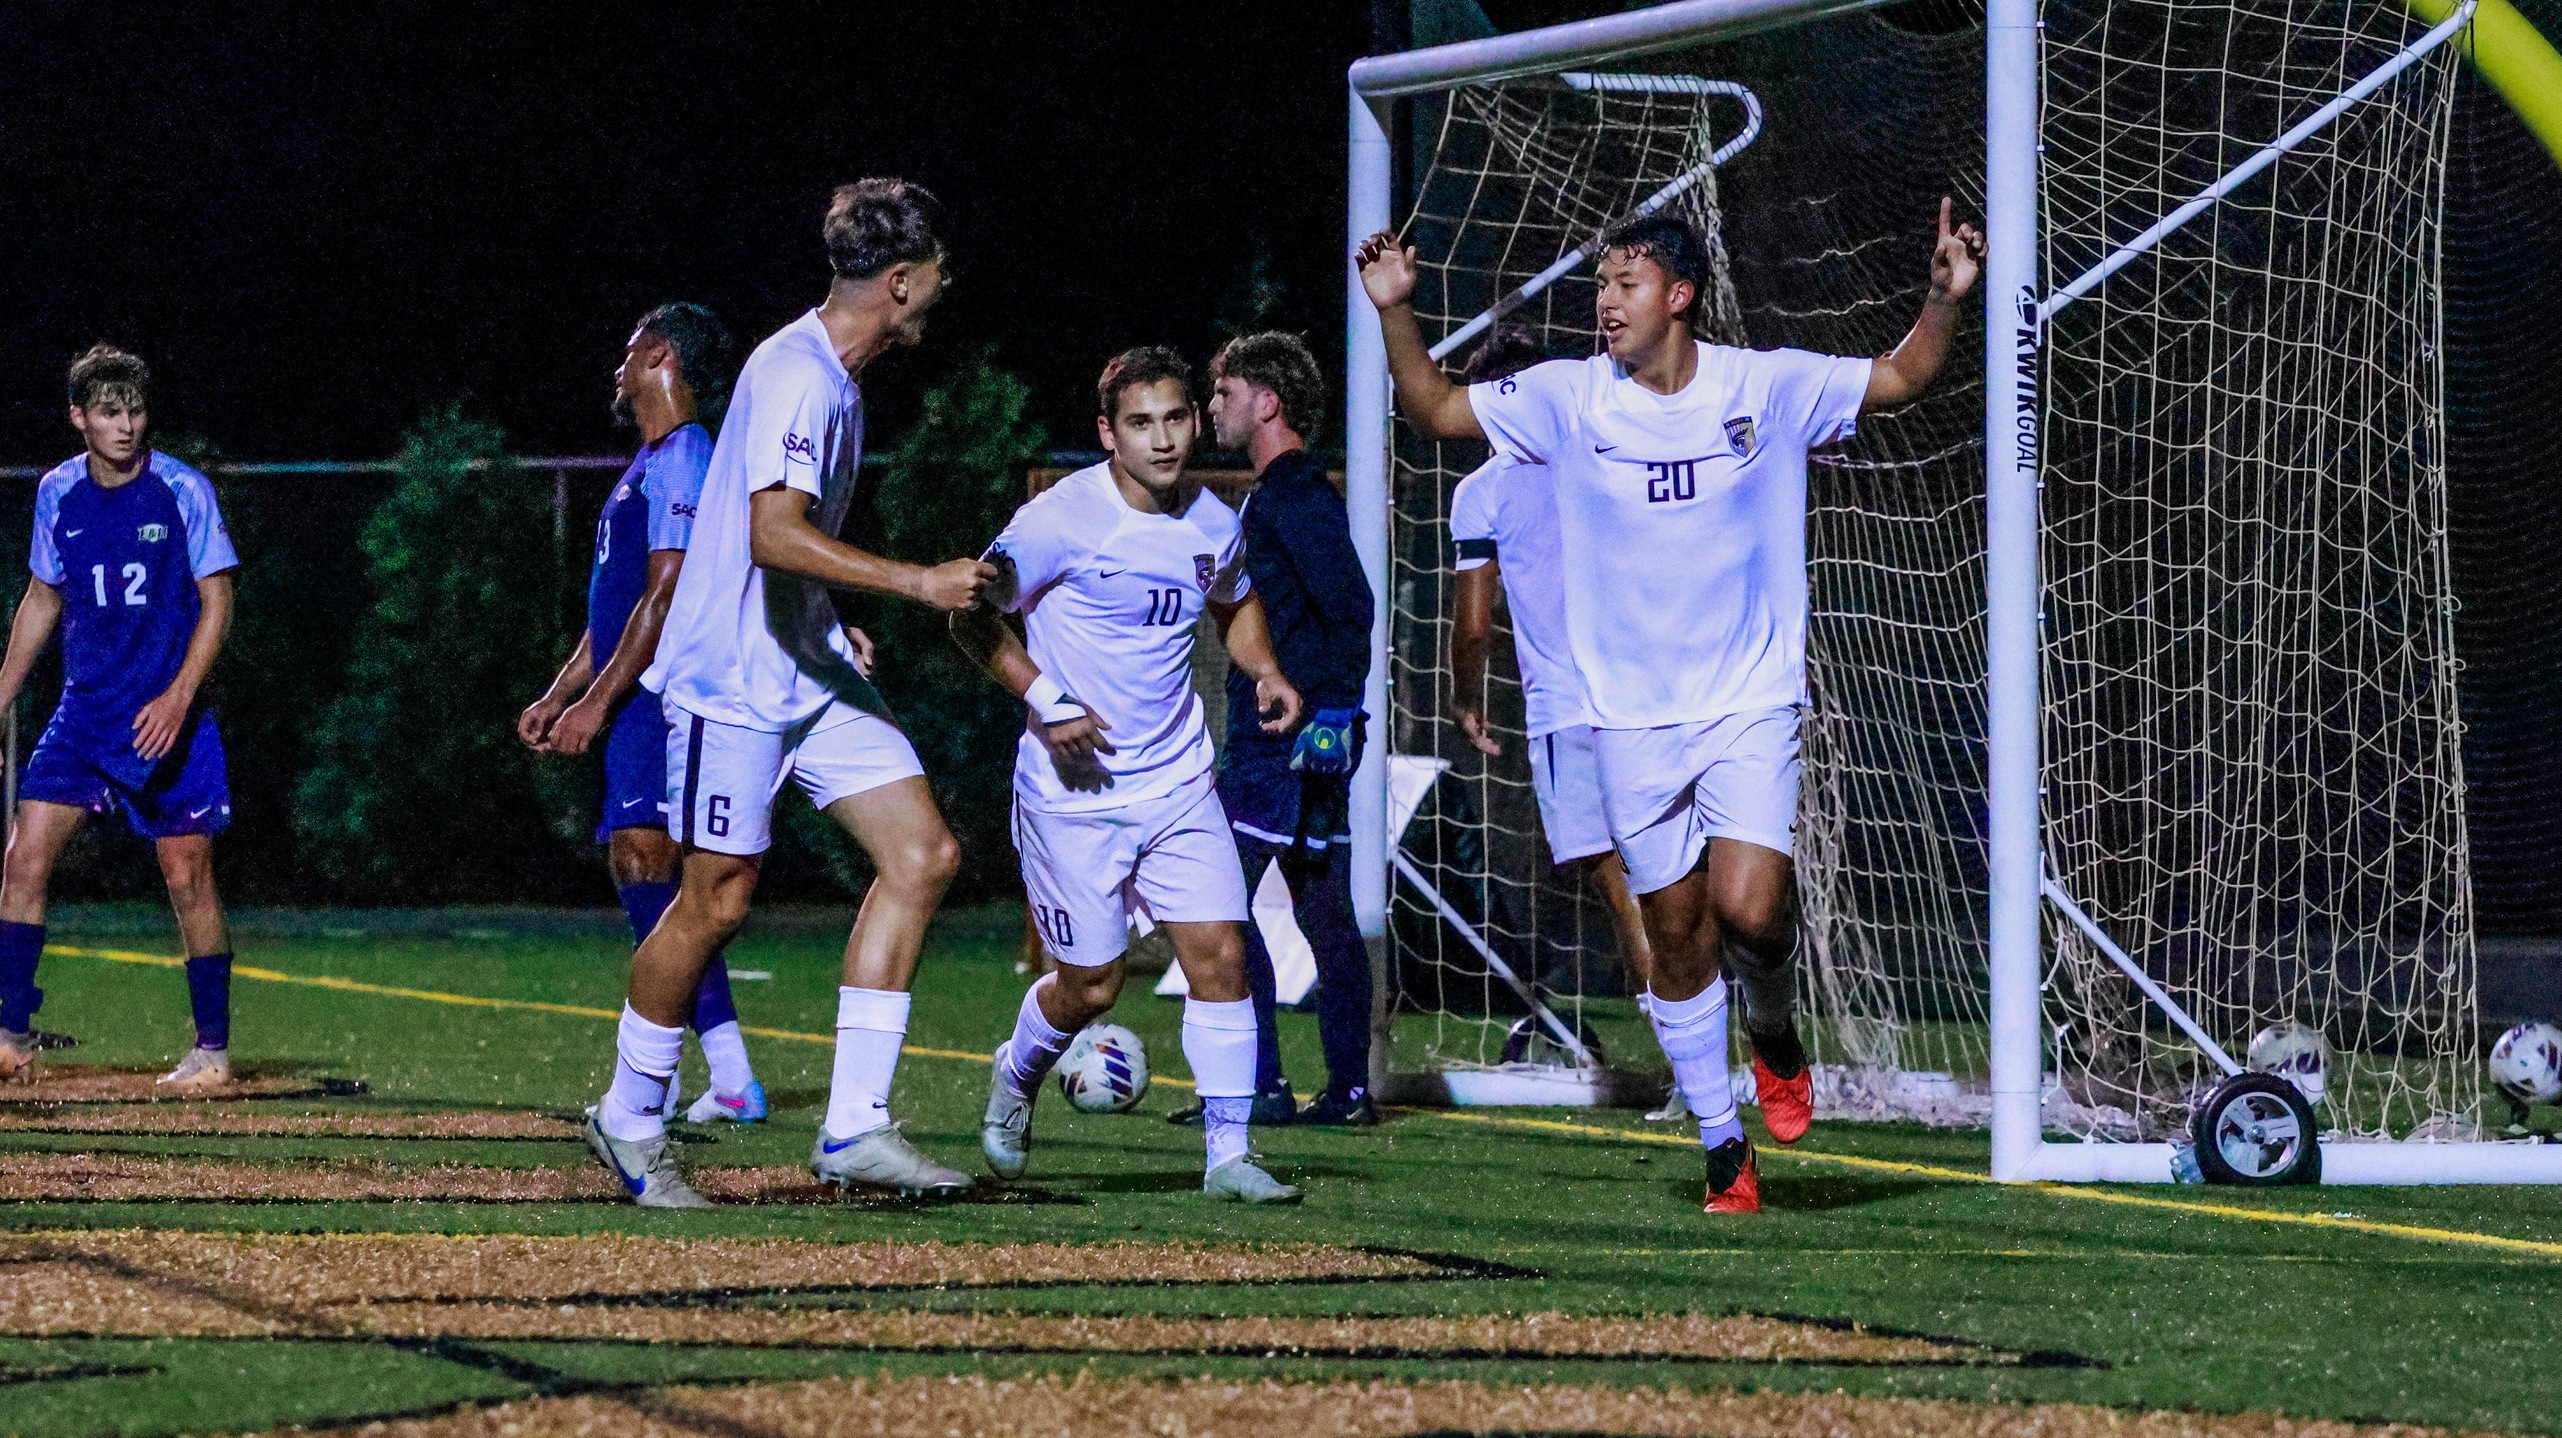 Cardona's Hat Trick Leads Trojans to 4-0 Win Over Emory & Henry